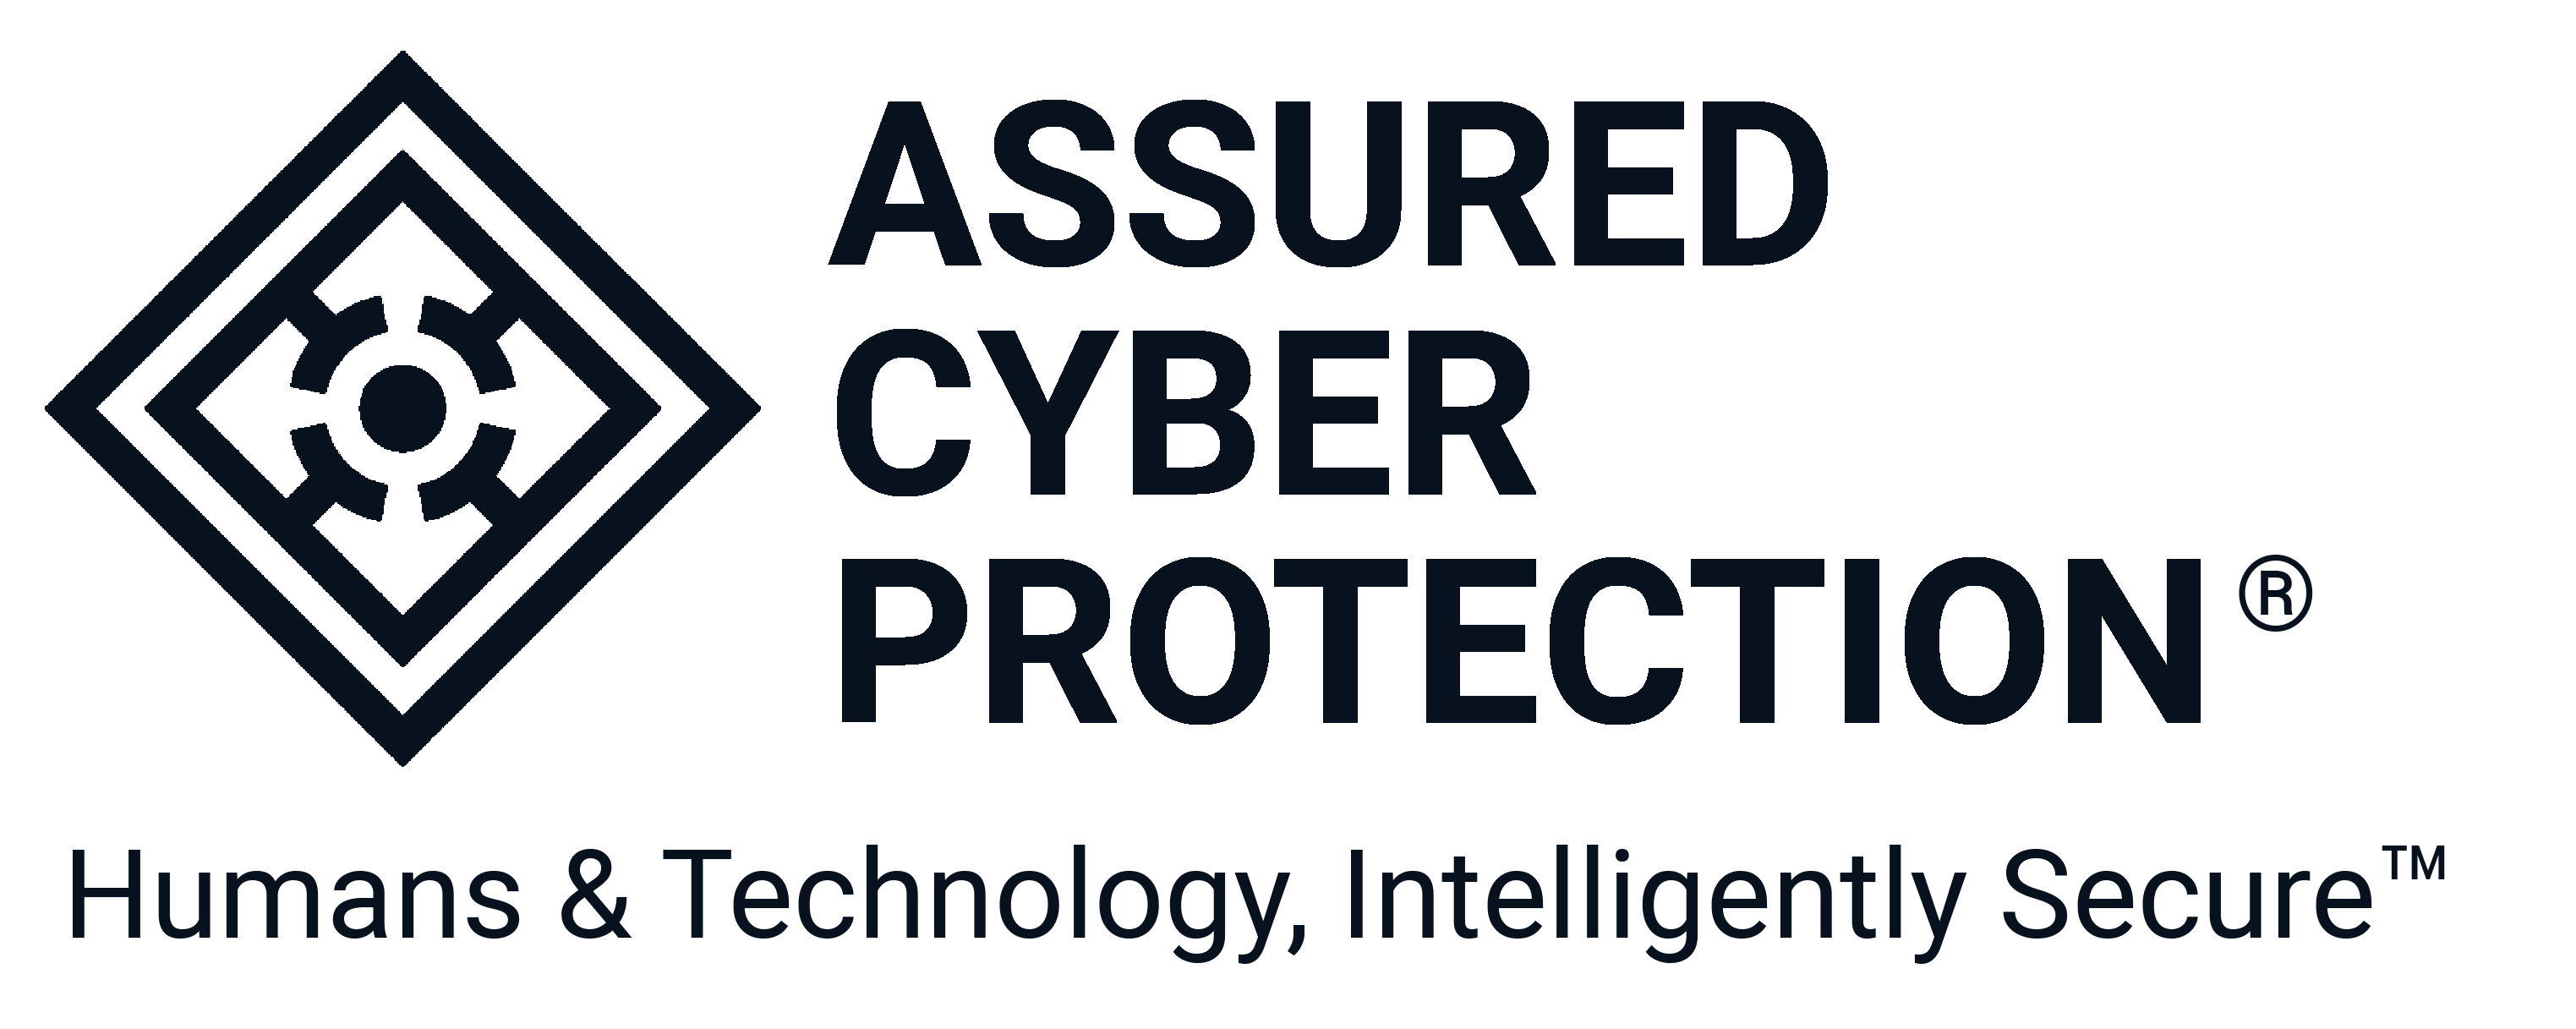 Assured Cyber Protection